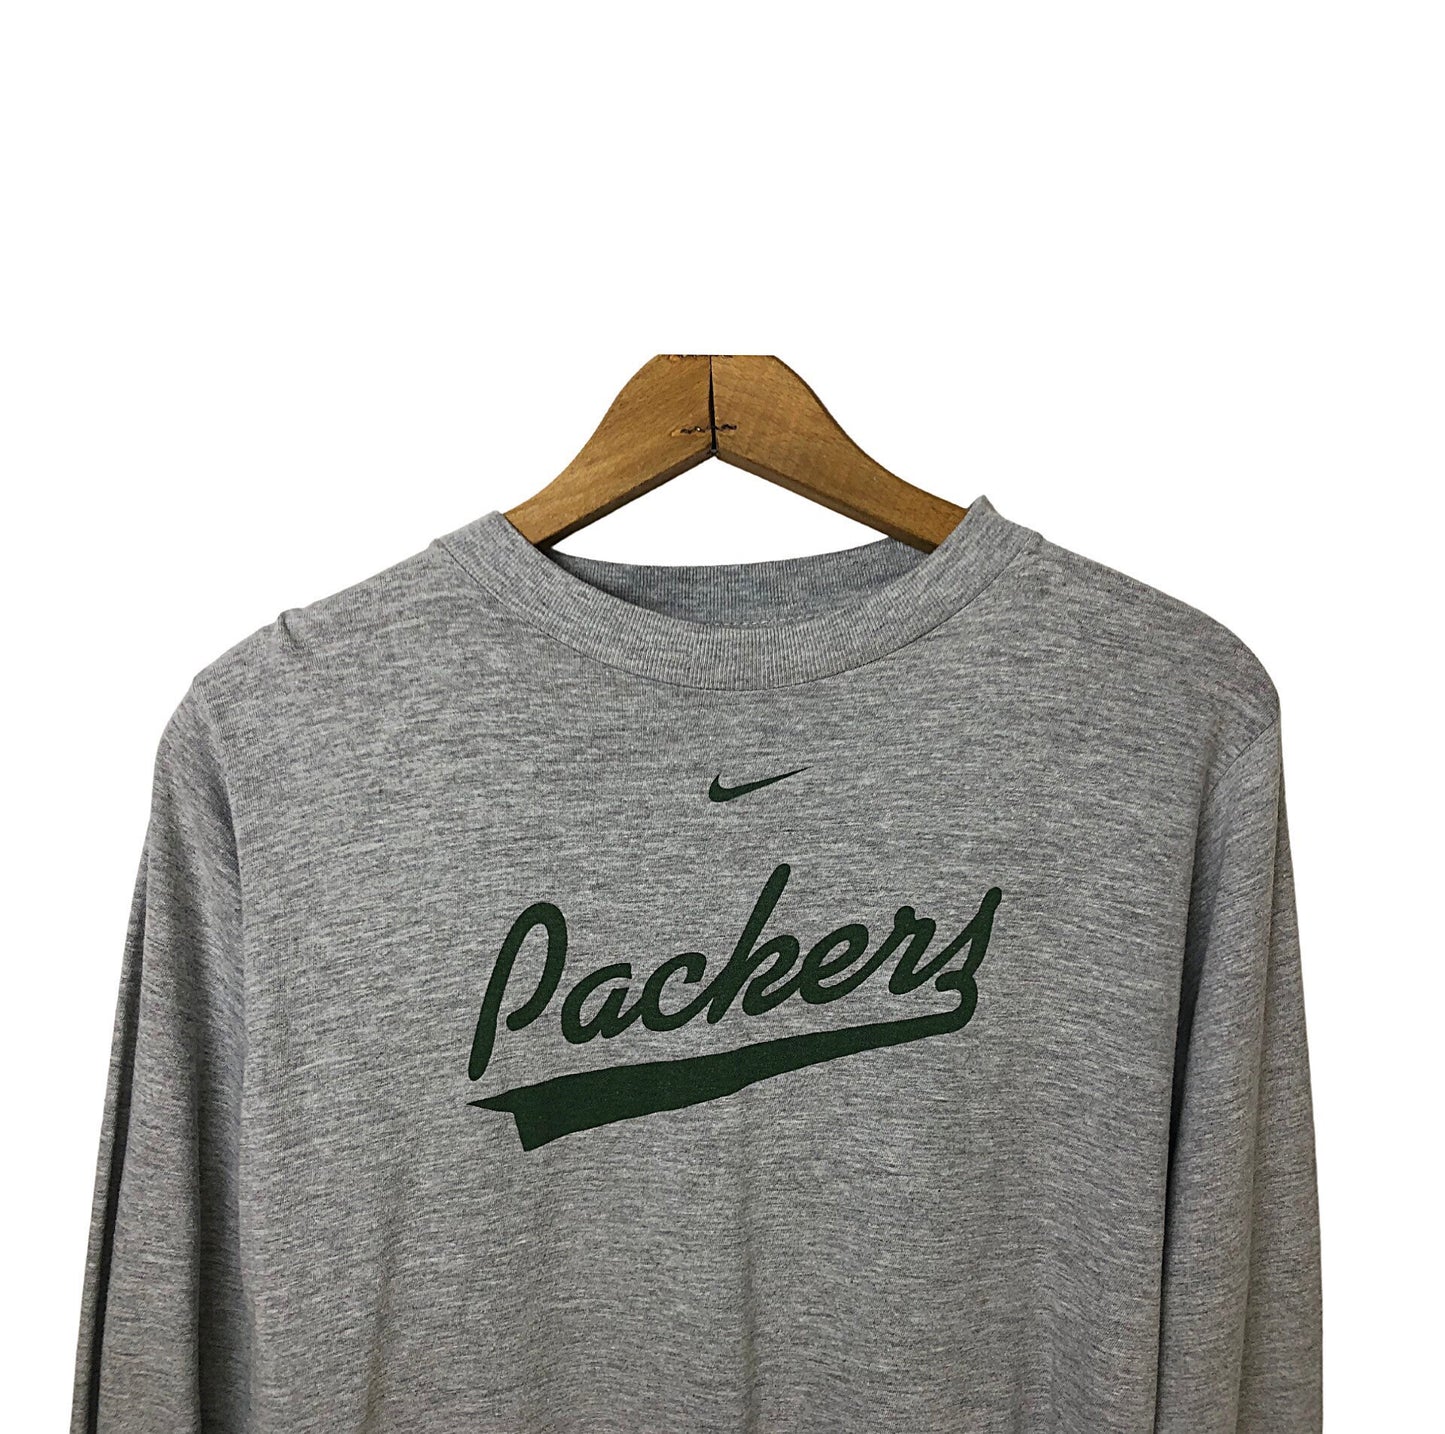 Vintage 90’s Green Bay Packers NIKE Swoosh 100% Cotton Long Sleeve Tee Kids size XL, Wms size S